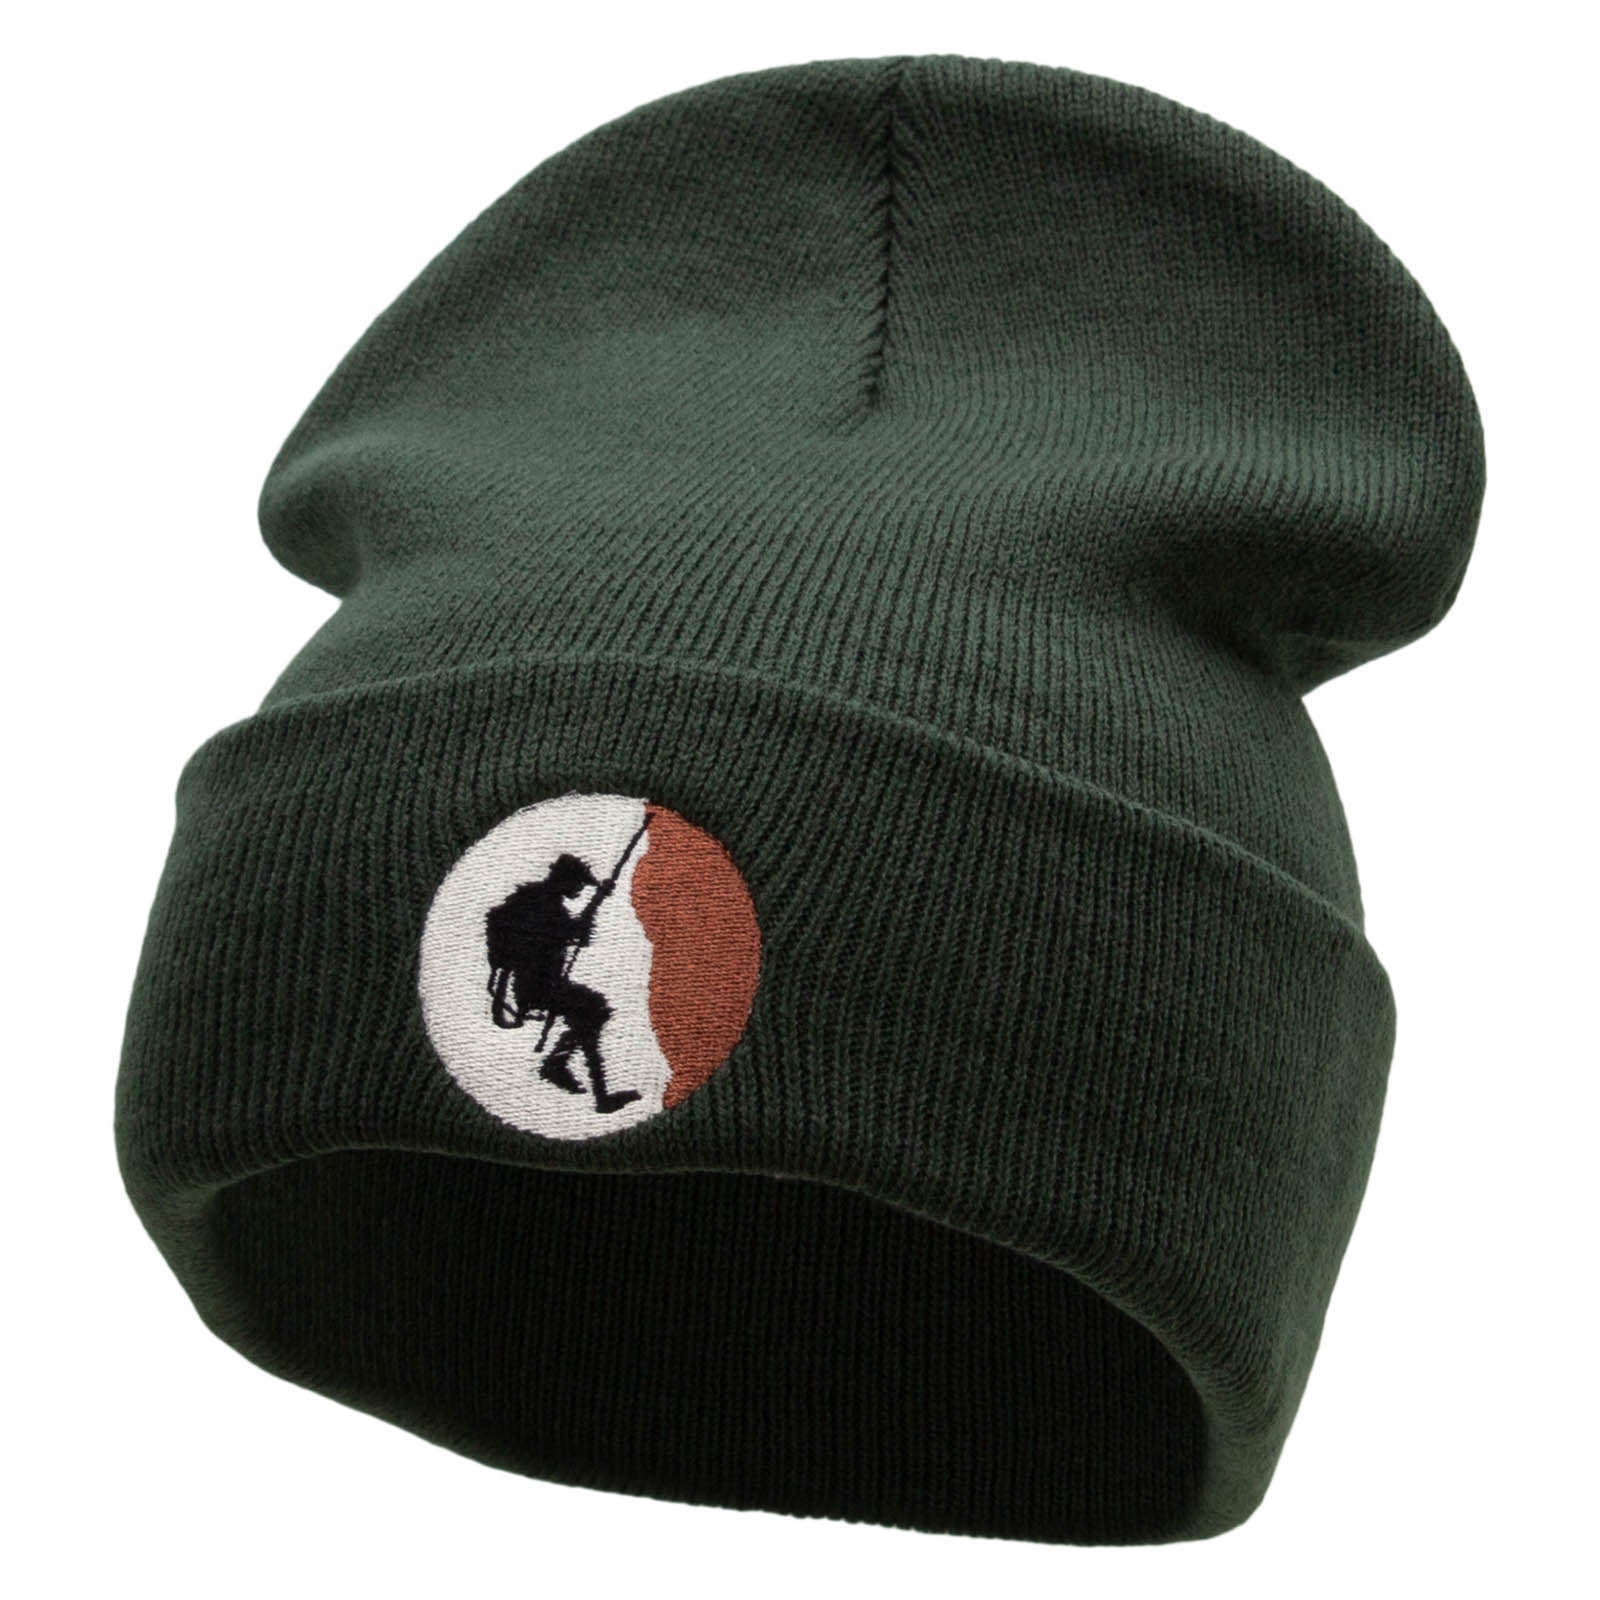 Rock Climbing Scene Embroidered 12 Inch Long Knitted Beanie - Olive OSFM